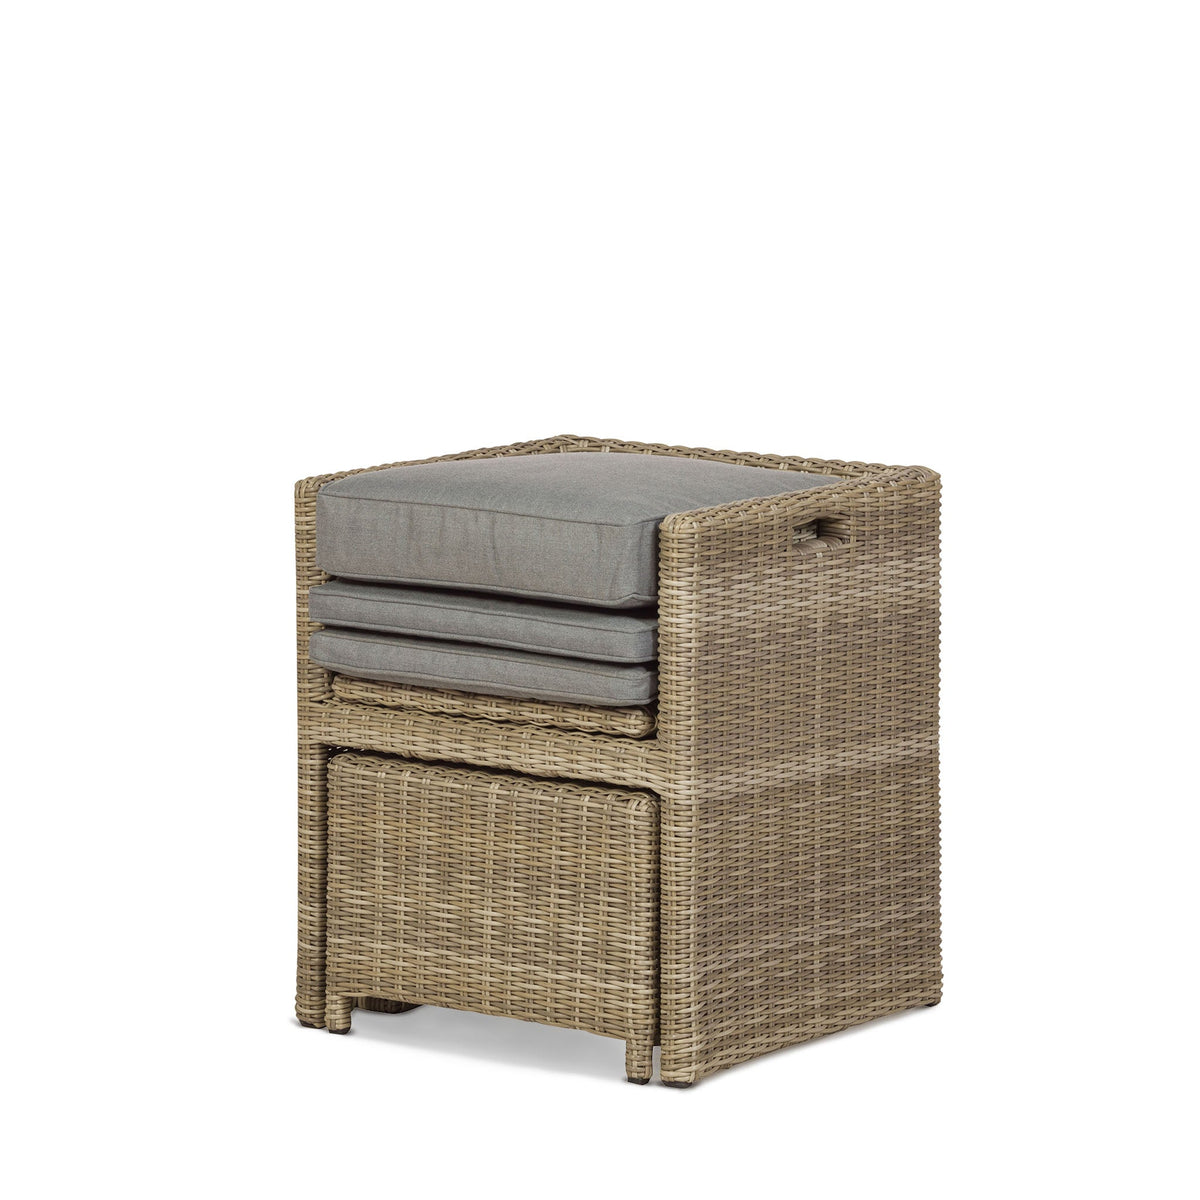 Wentworth 8 Seat Deluxe Rattan Cube Garden Dining Set - Side view of Chair & Foot-Stool Packed up to place under table